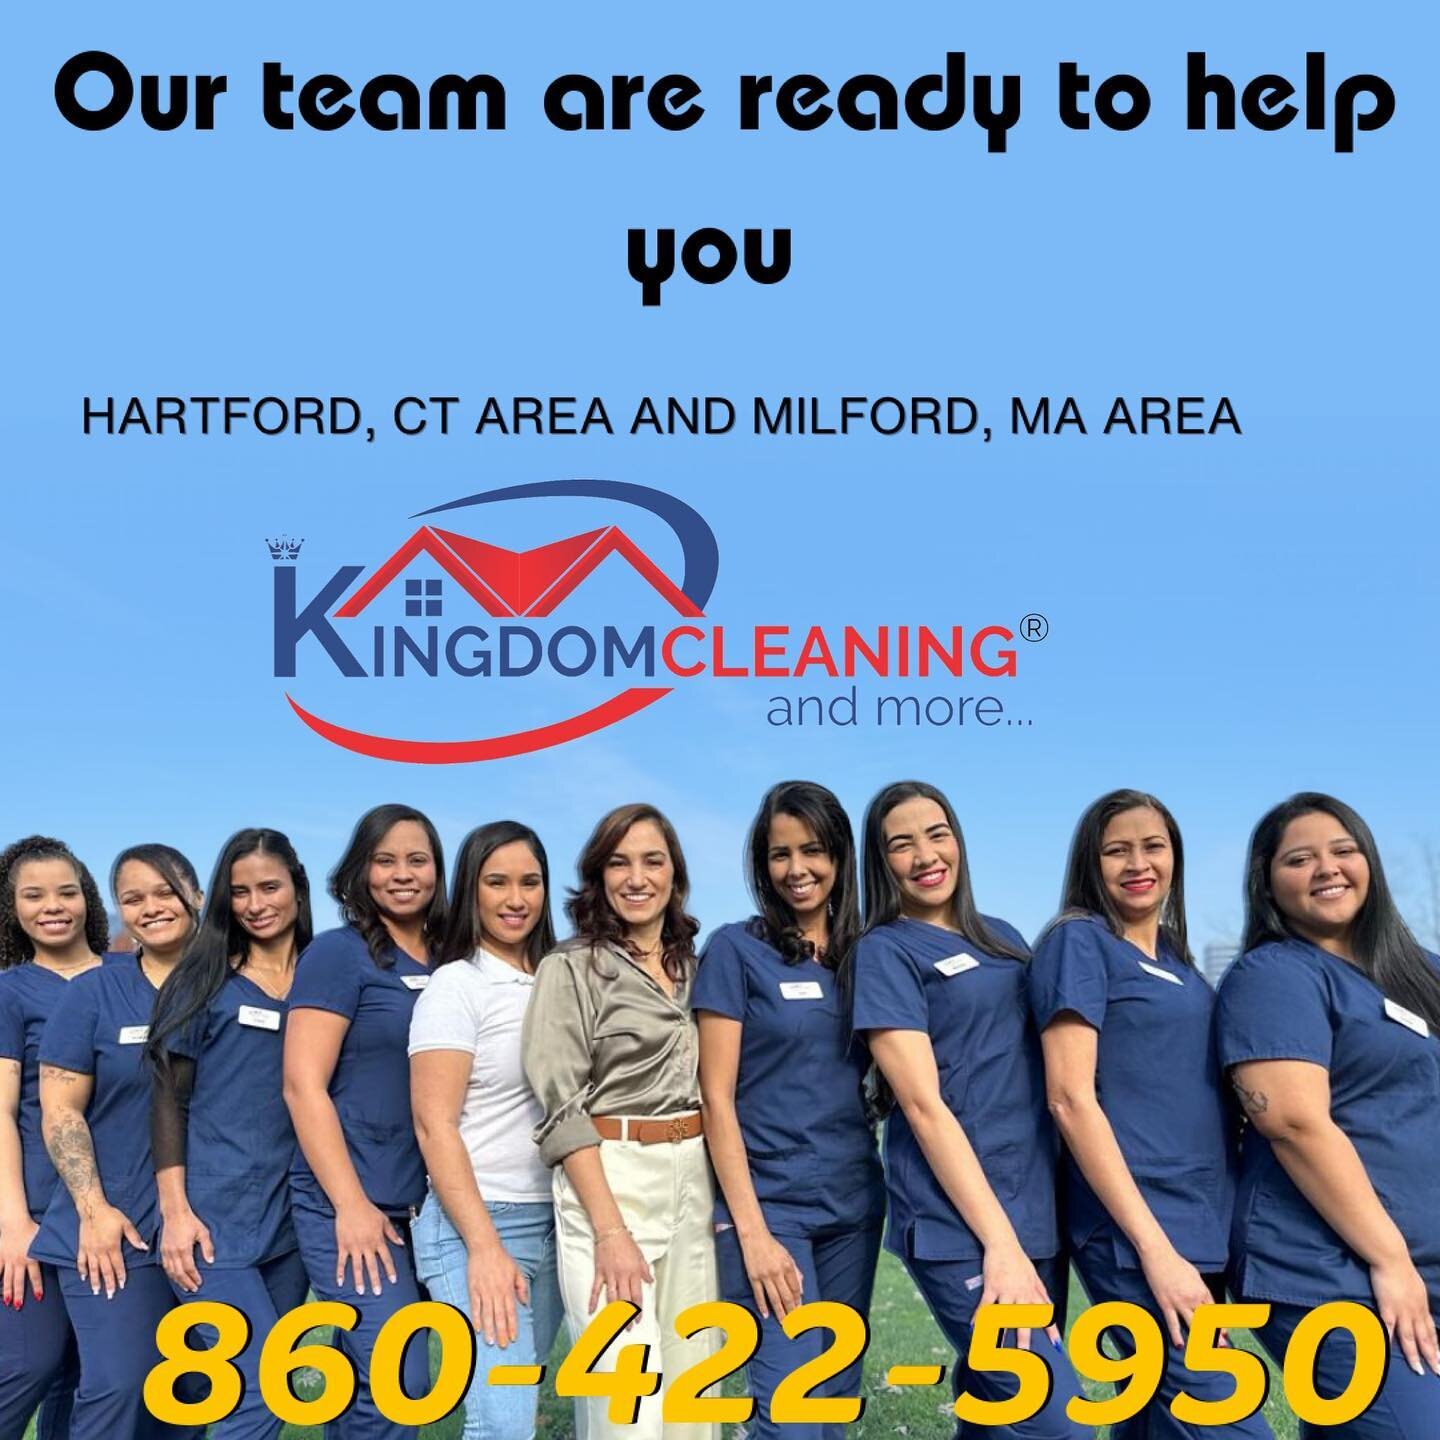 Our team is highly trained to better serve customers. We aim to transform the environment of each home through our service, working in harmony and making your life easier through cleaning.